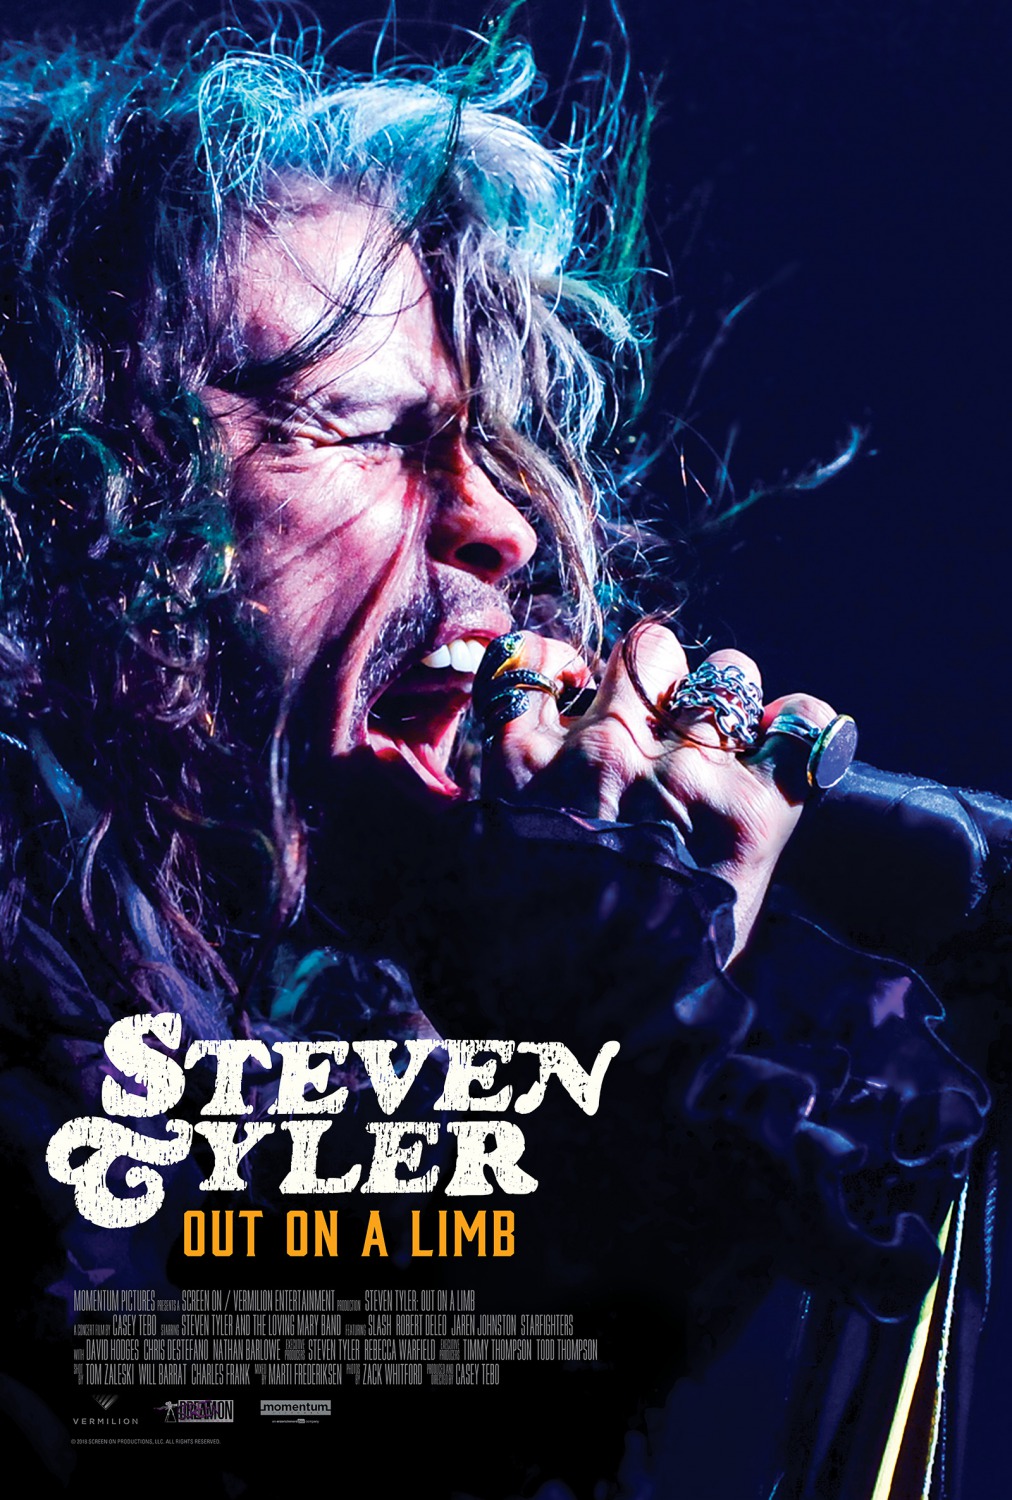 Extra Large Movie Poster Image for Steven Tyler: Out on a Limb 